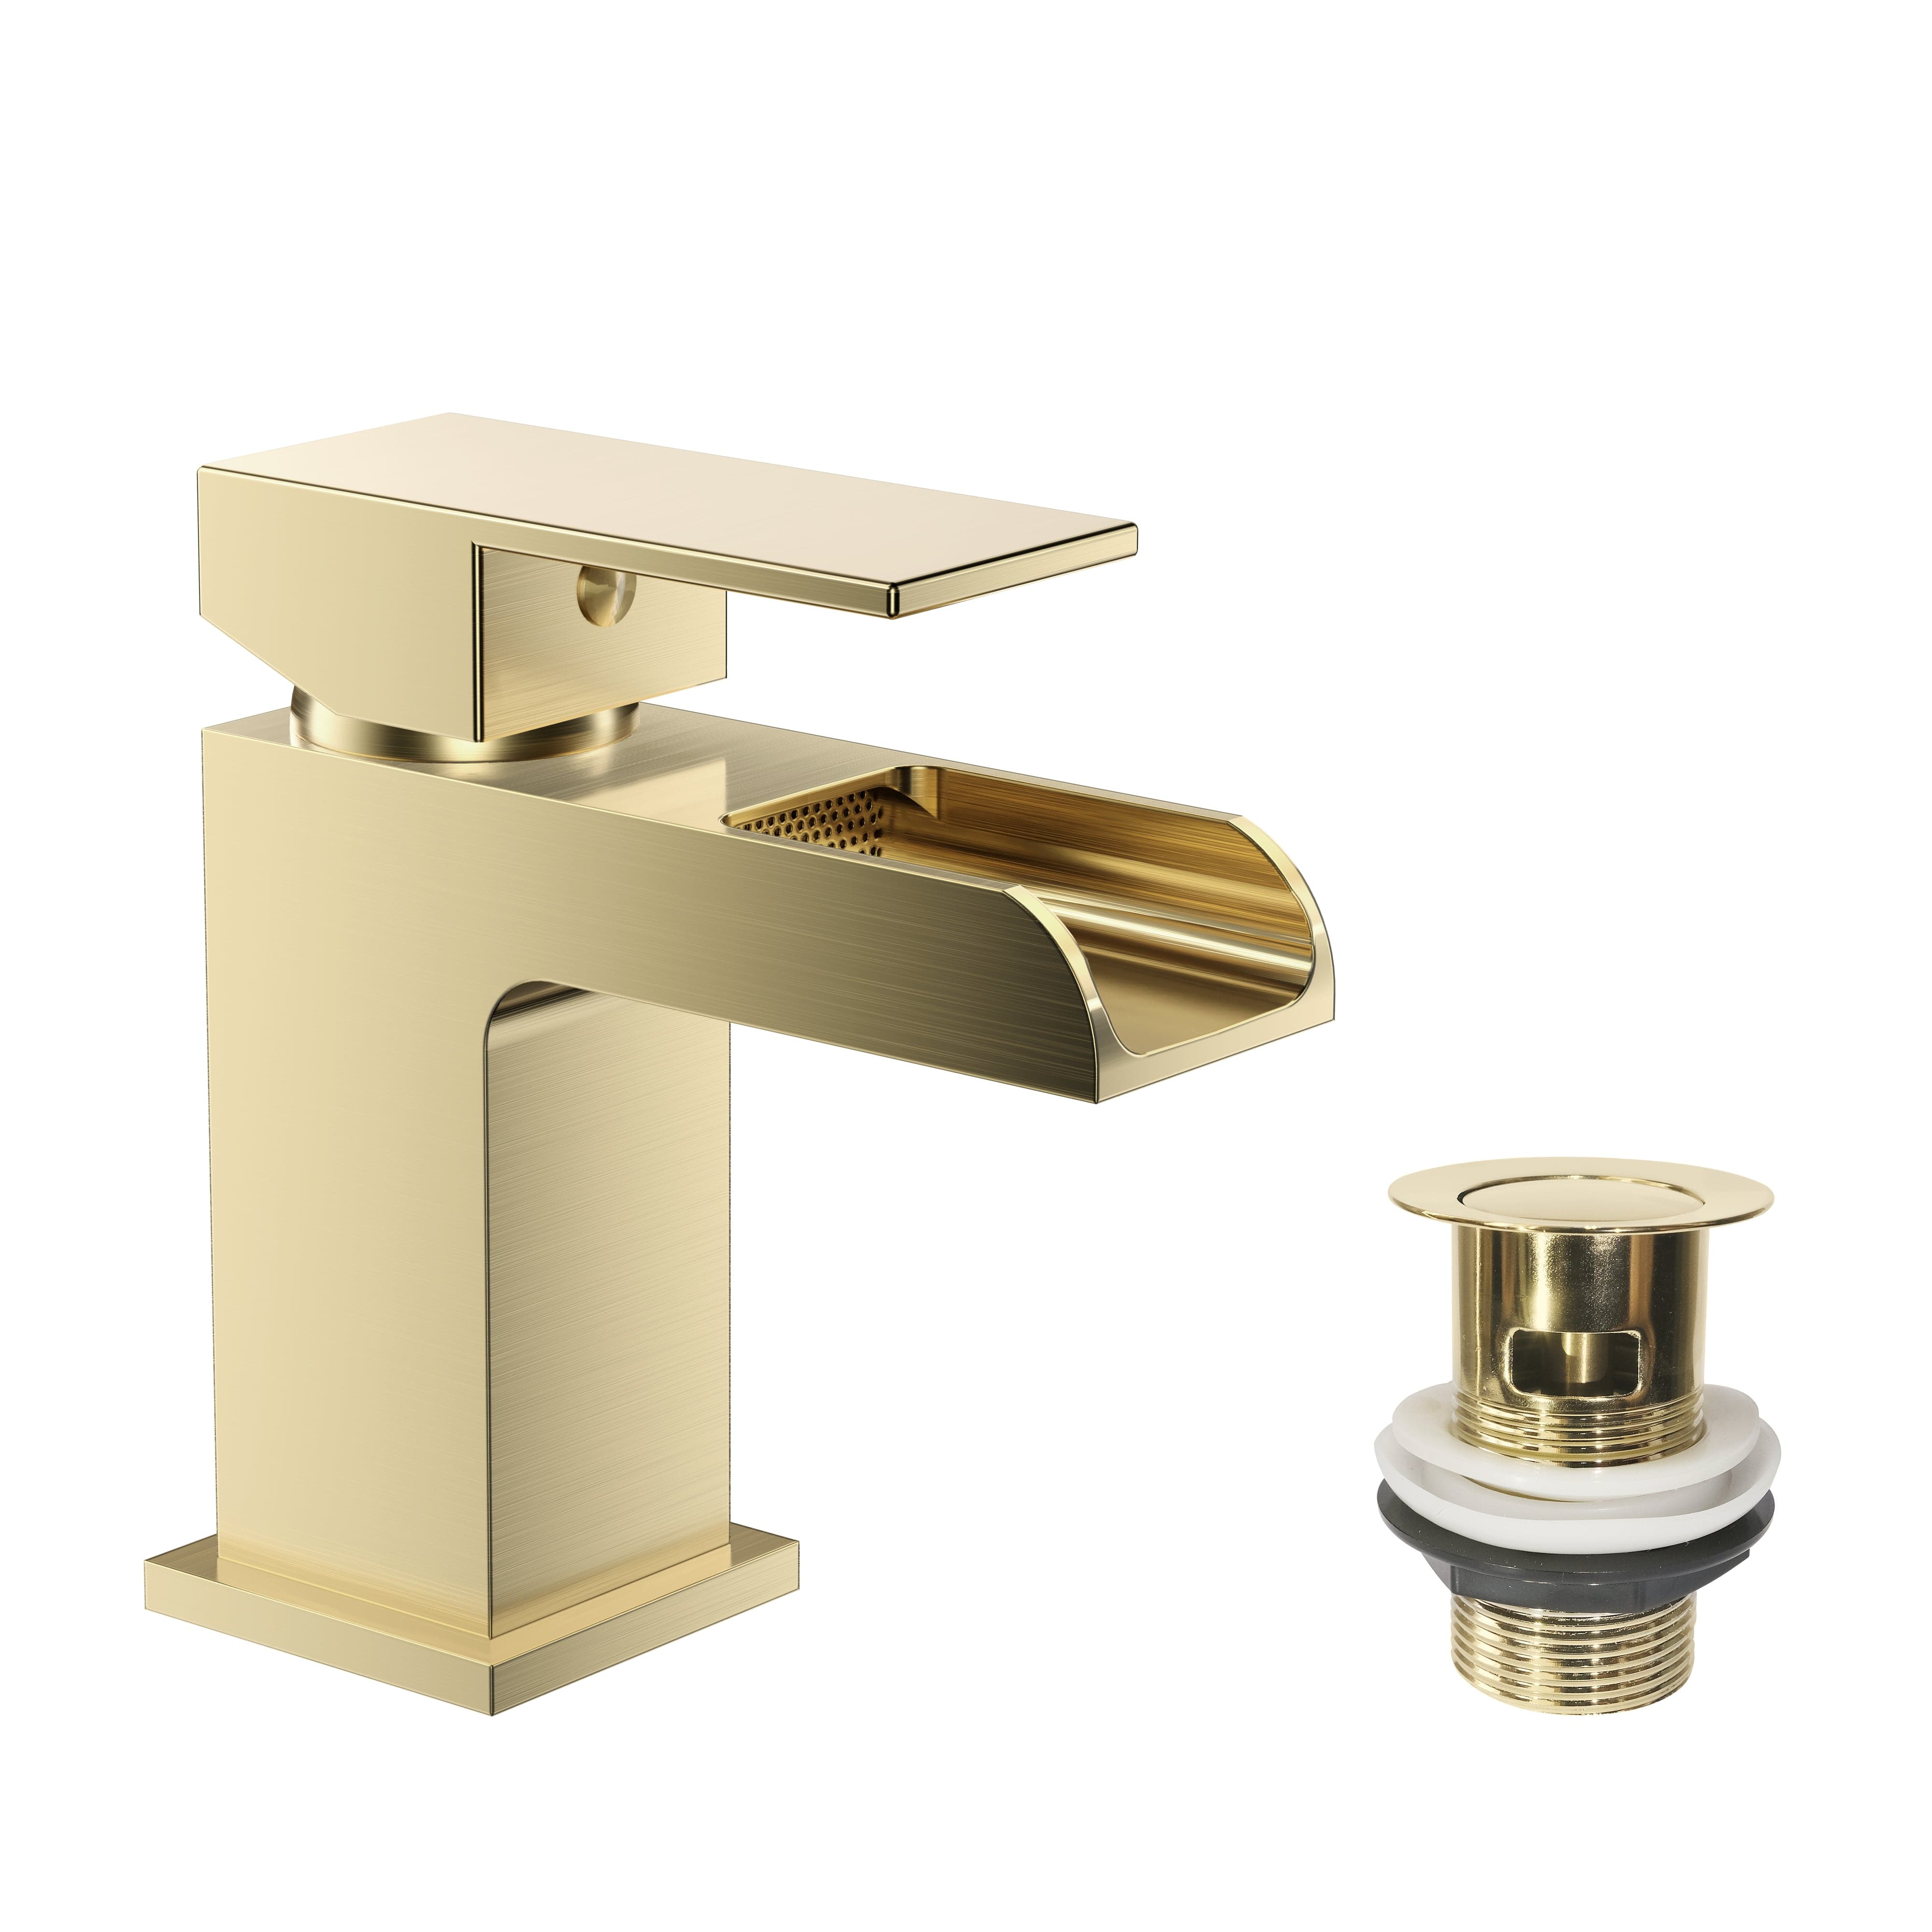 Kelvin Square Waterfall Mono Basin Mixer Tap with Waste in Brushed Brass finish, stylish bathroom fixture, UK trend.